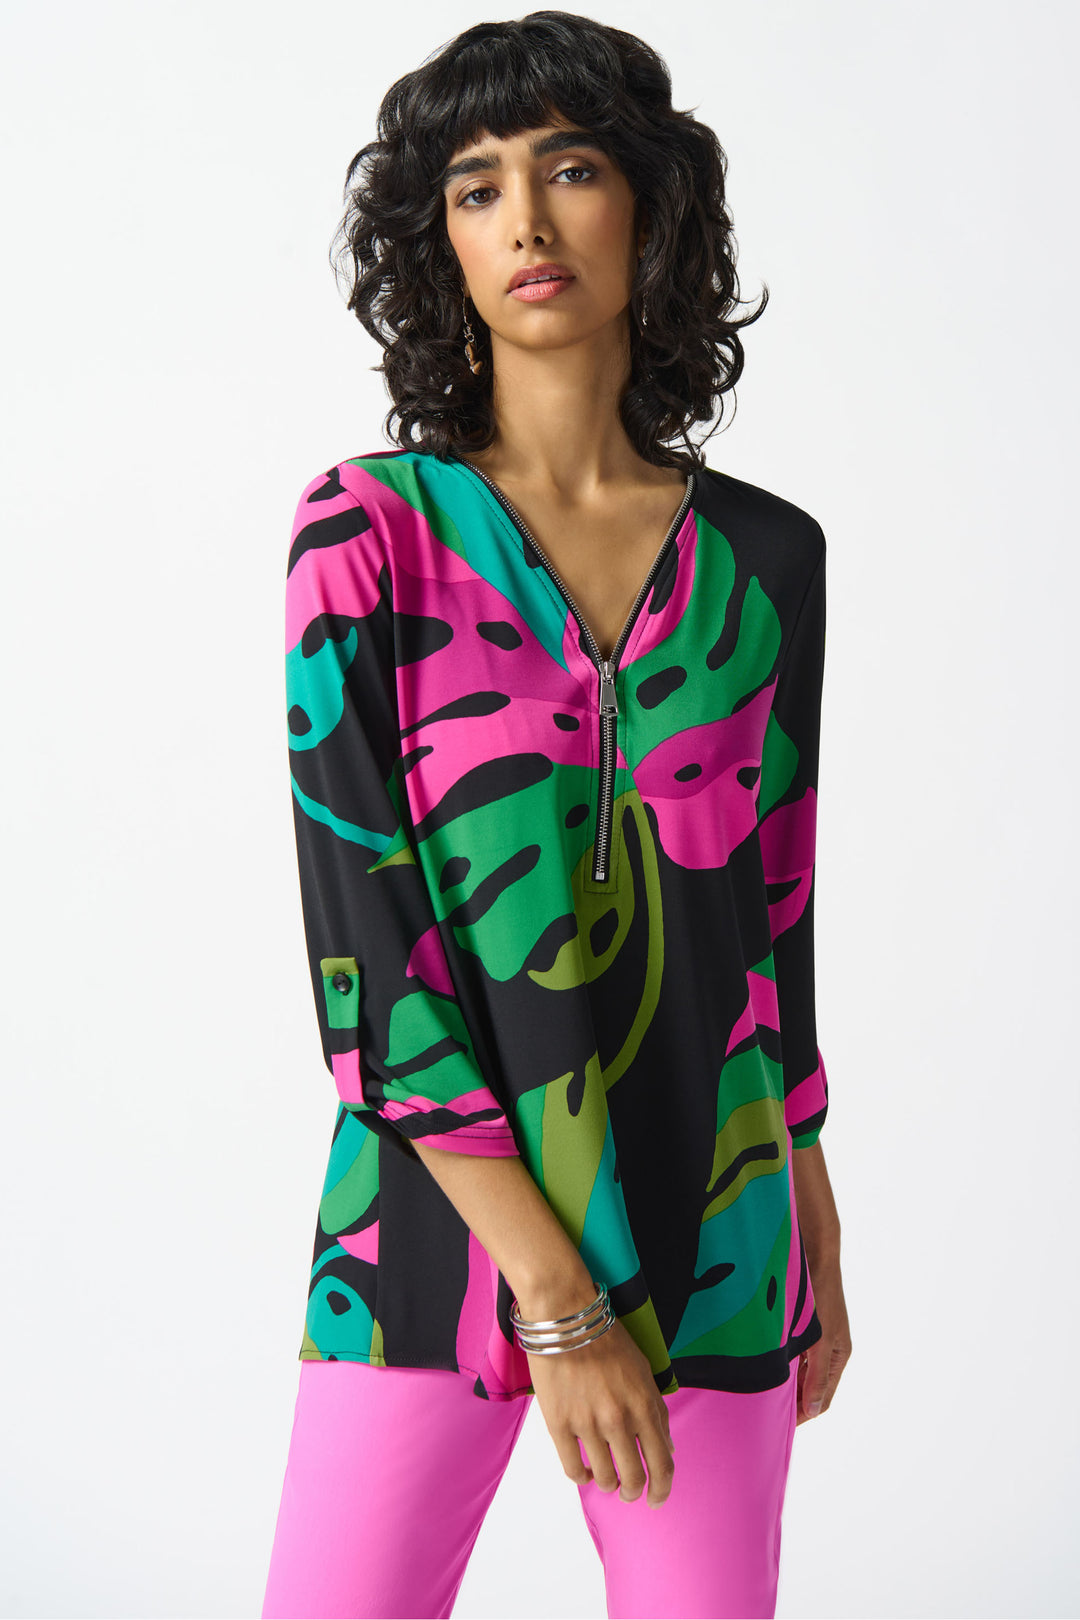 This ultra-soft and lightweight top features a vibrant floral print and a playful v-neck with zipper.